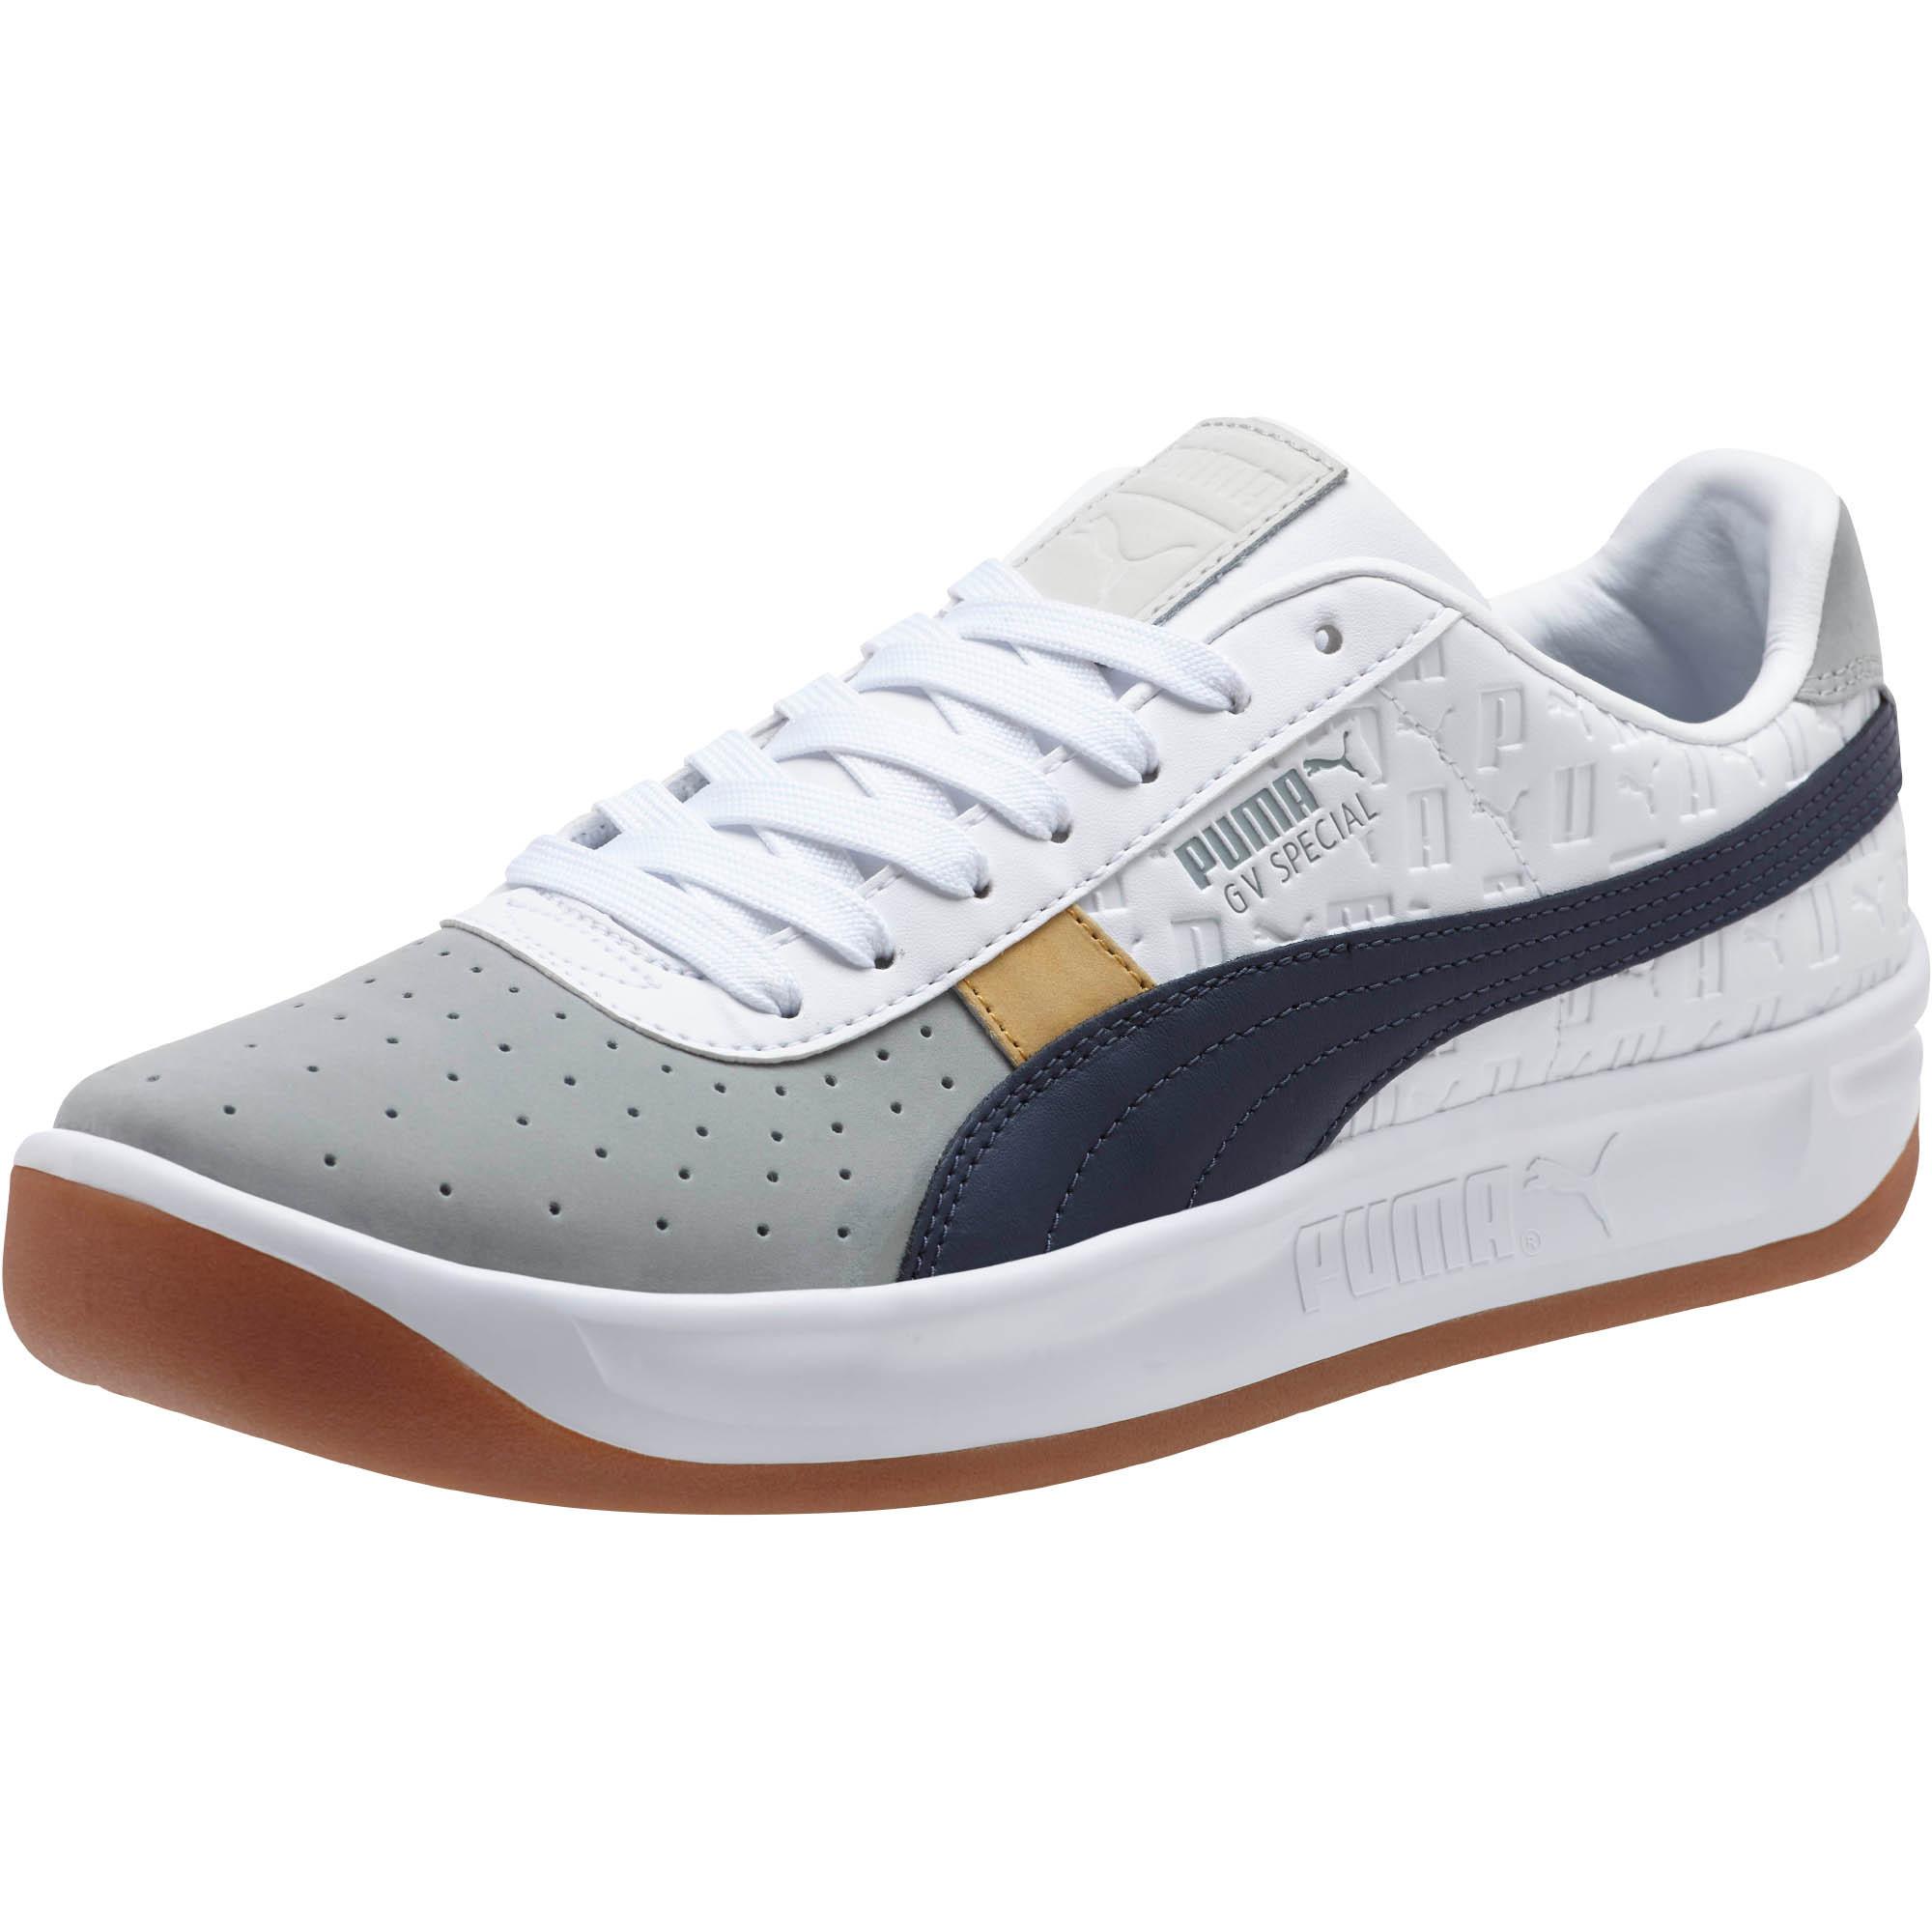 PUMA Gv Special Lux Men's Sneakers for 